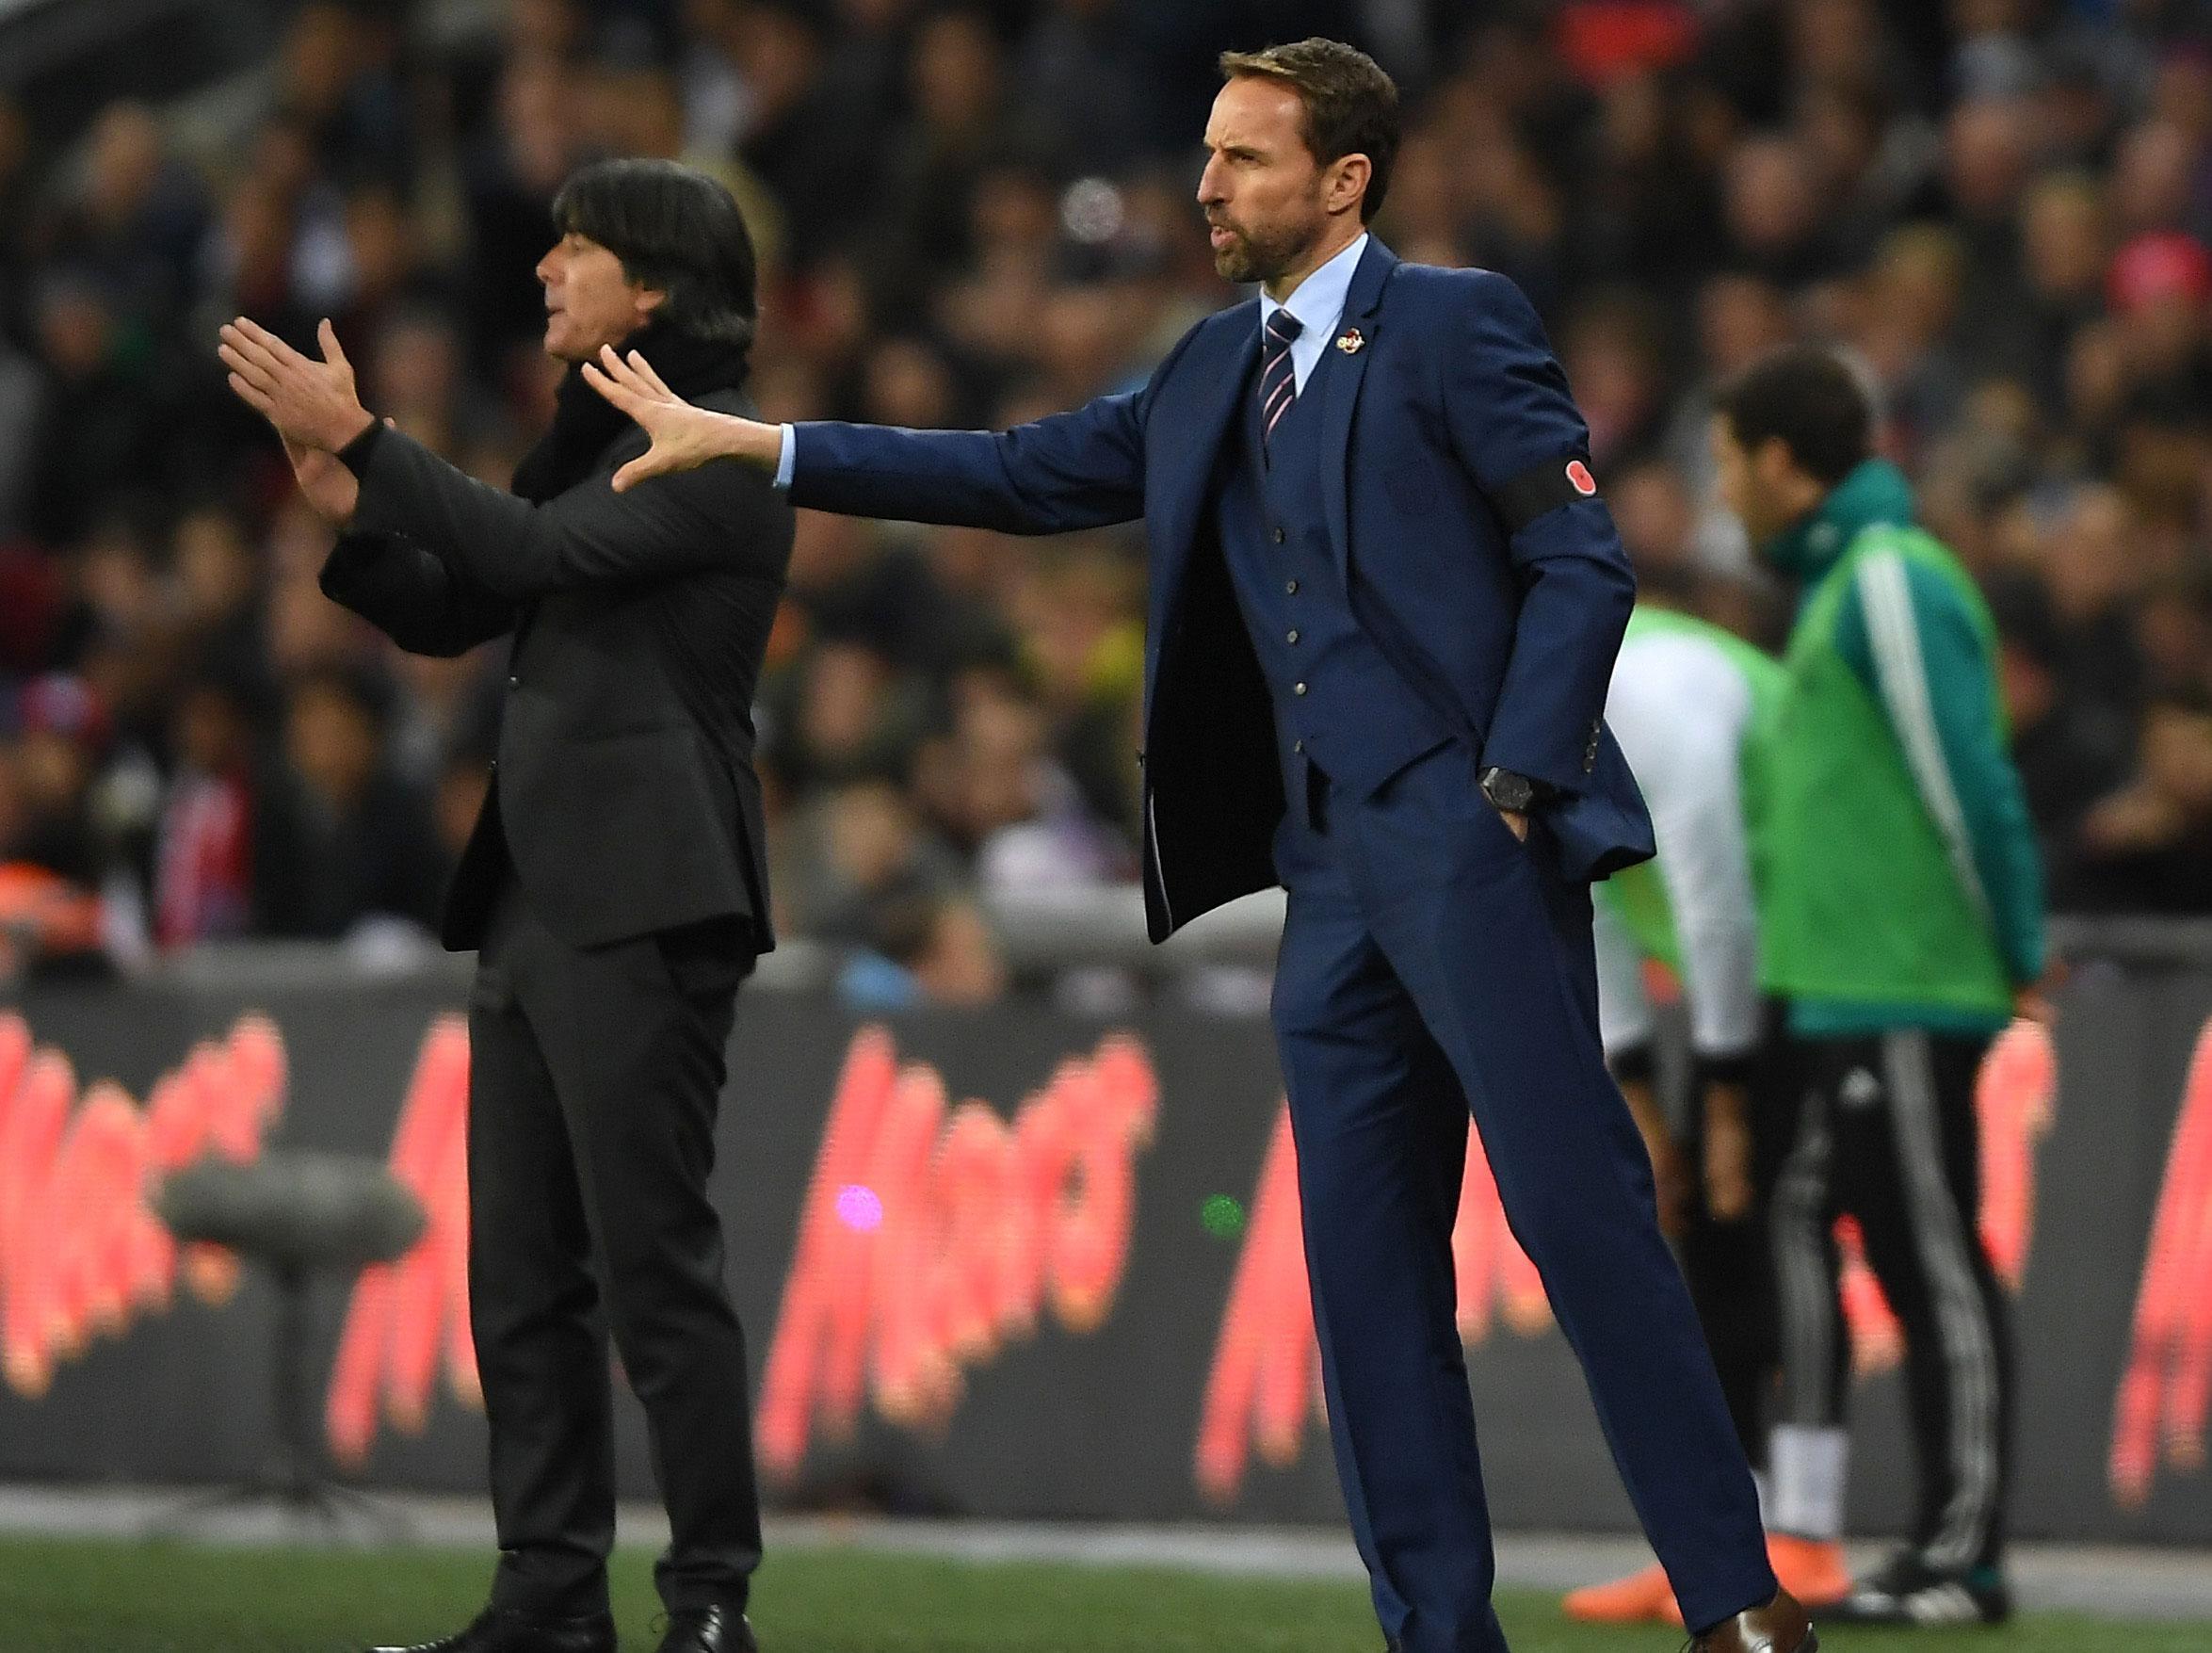 Gareth Southgate was impressed by how his young charges performed at Wembley